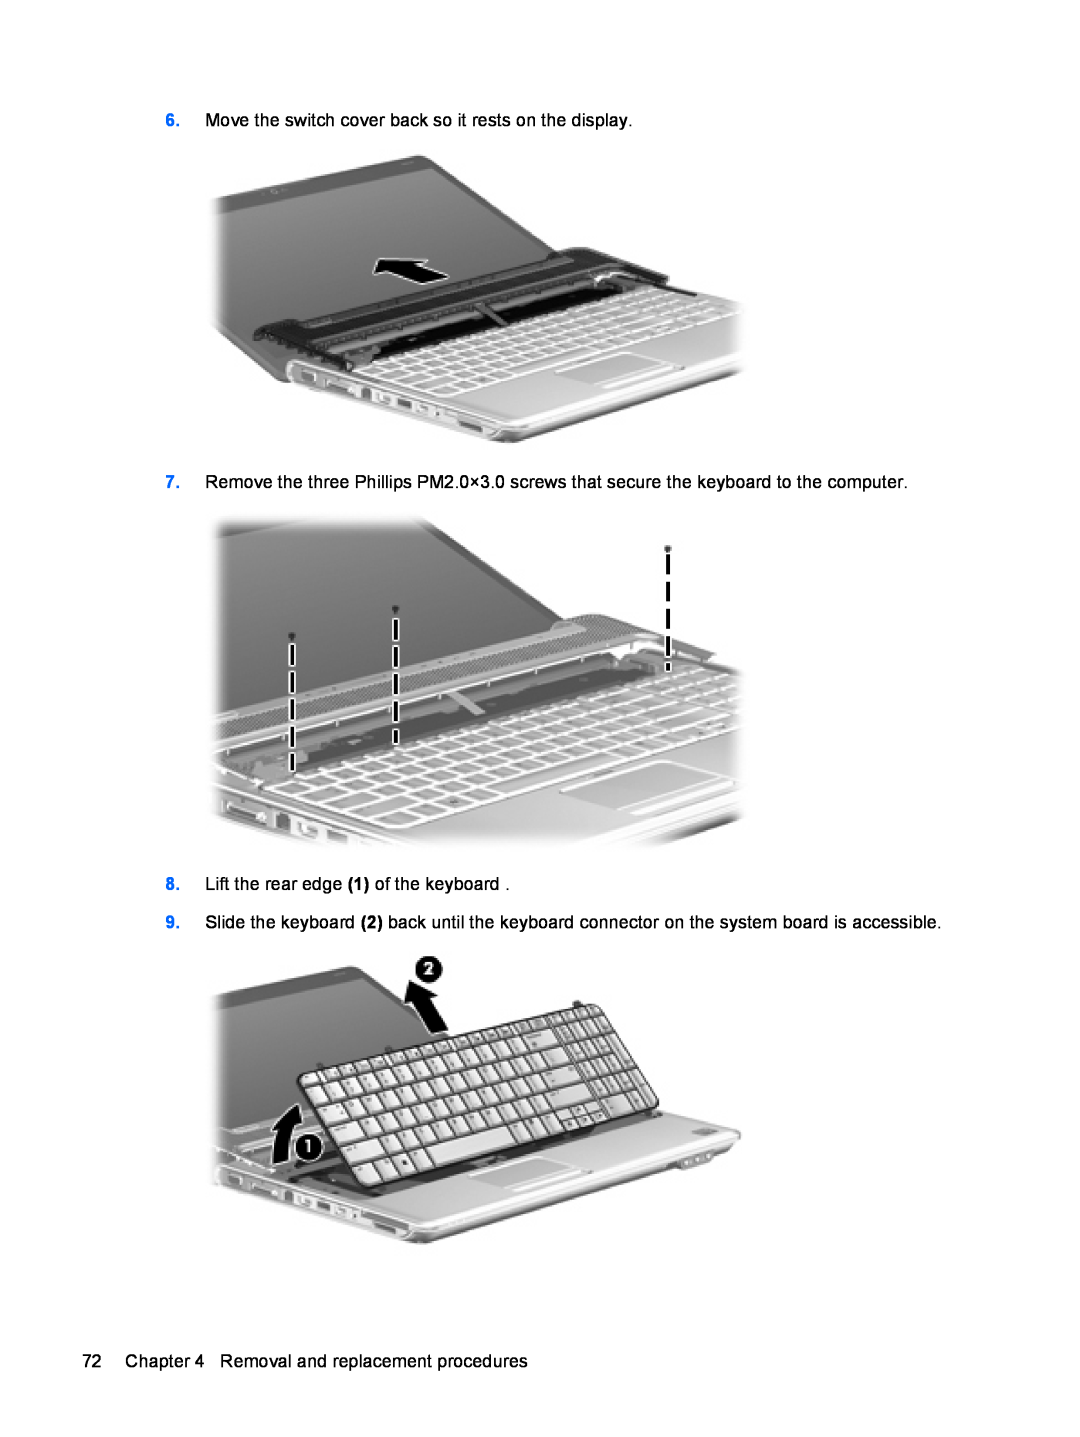 HP DV6 manual Move the switch cover back so it rests on the display, Lift the rear edge 1 of the keyboard 